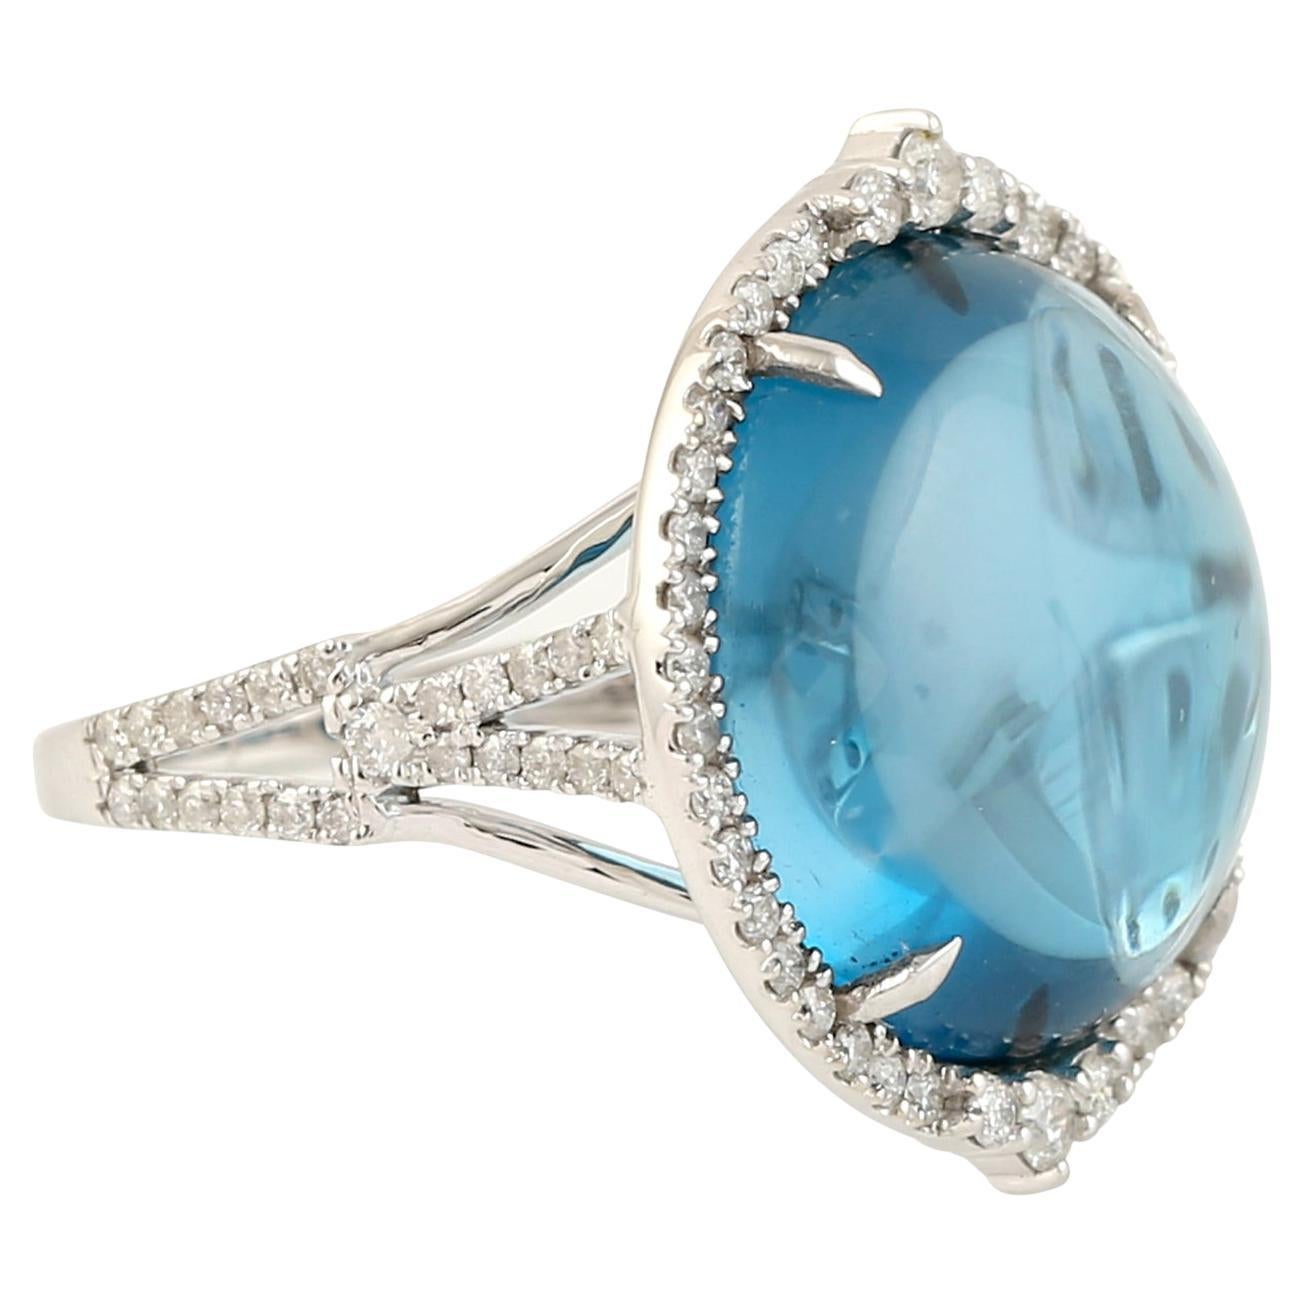 15.14 ct Oval Shaped Blue Topaz Cocktail Ring w/ Diamonds Made In 18k White Gold For Sale